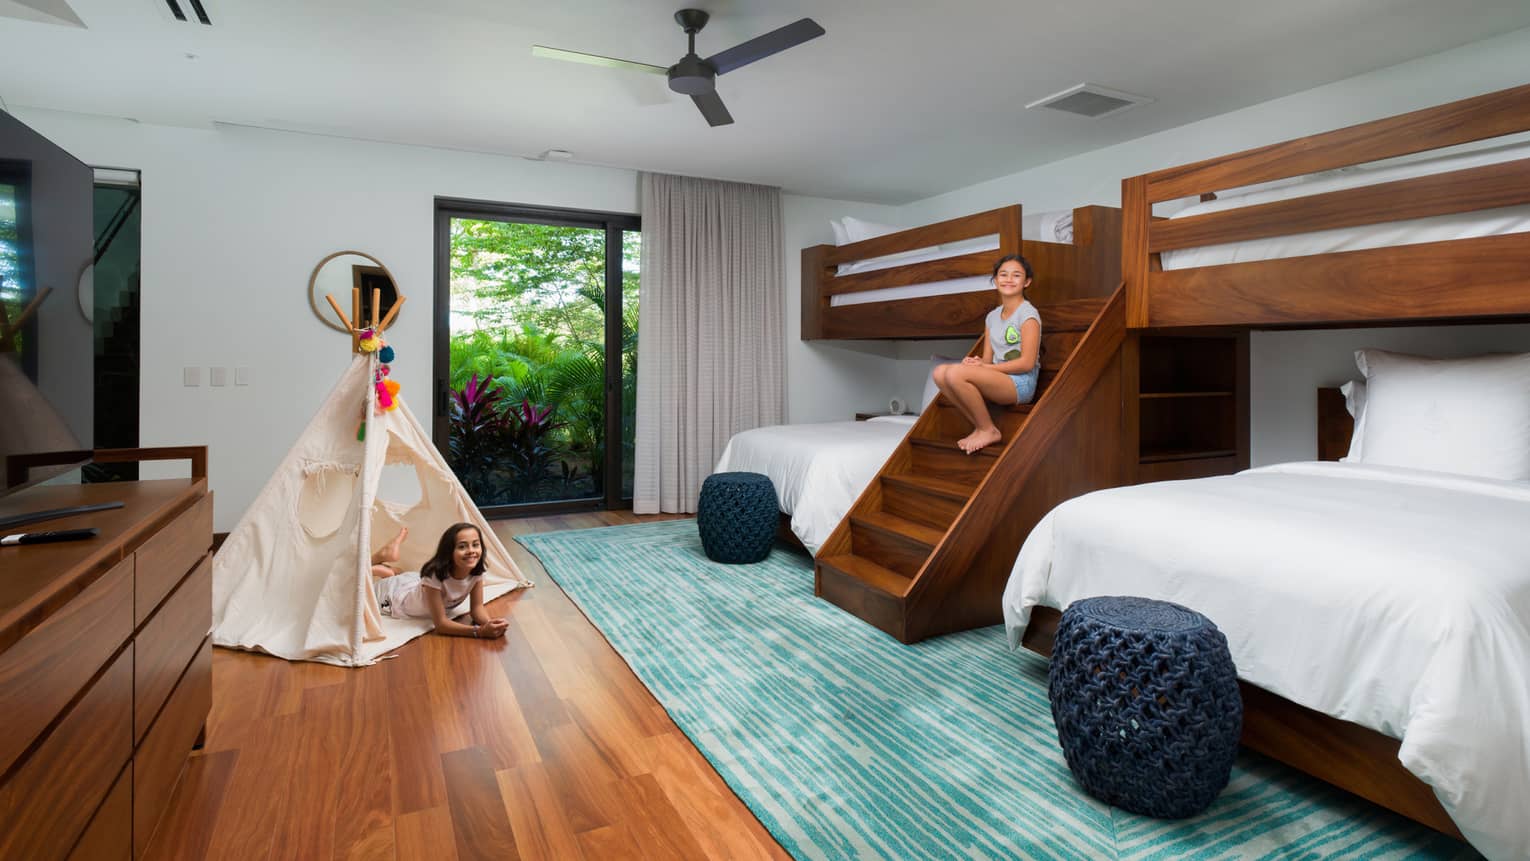 Two kids play in bedroom with bunk beds, tent